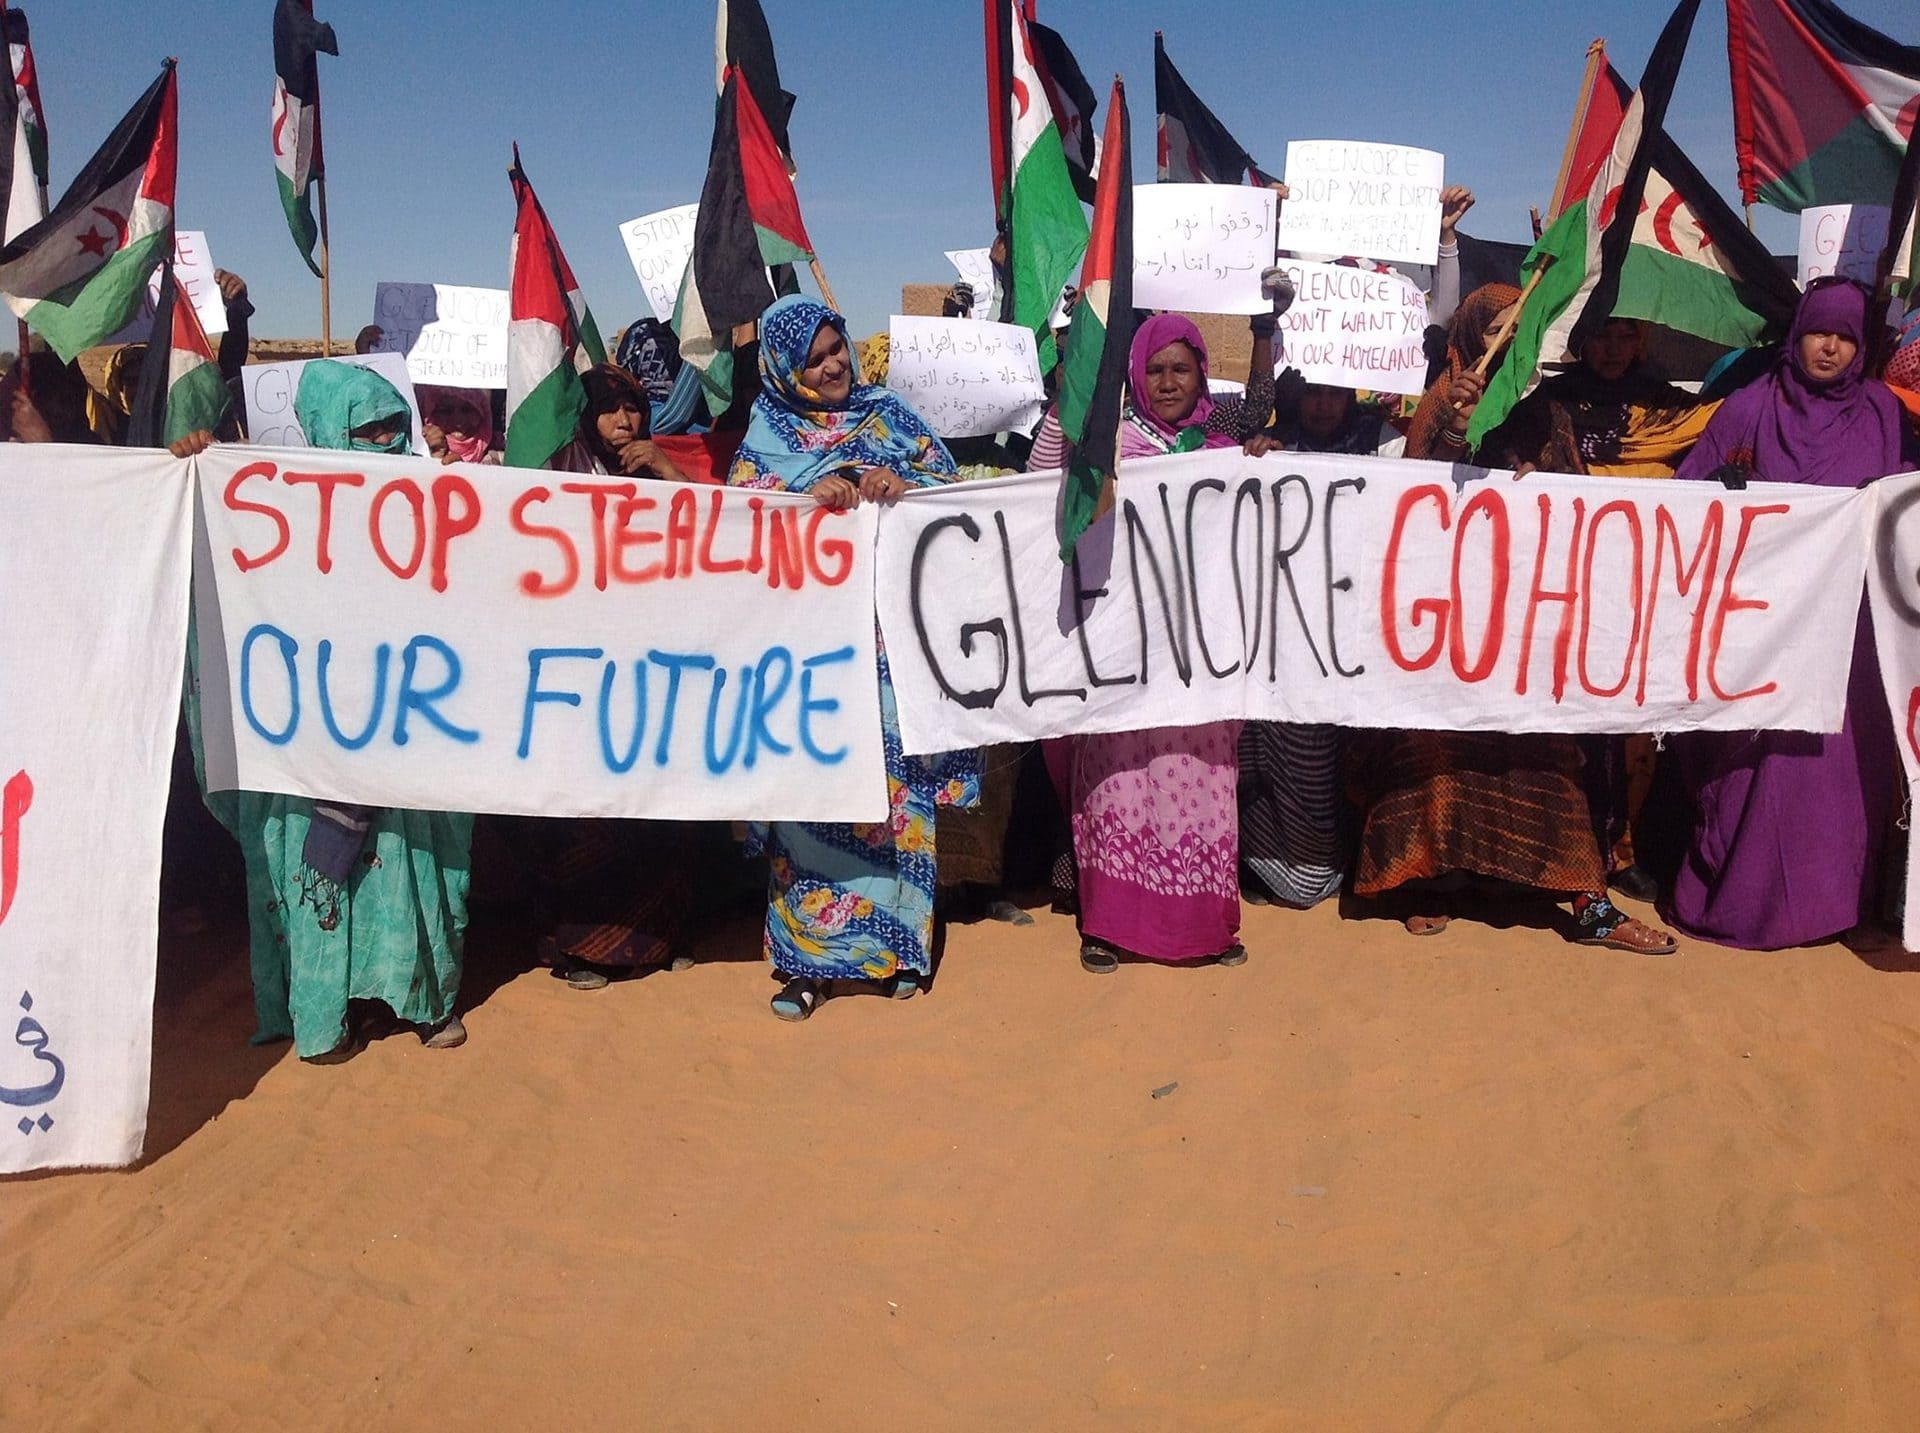 Sahraouis demonstrate with banners: Glencore go home!